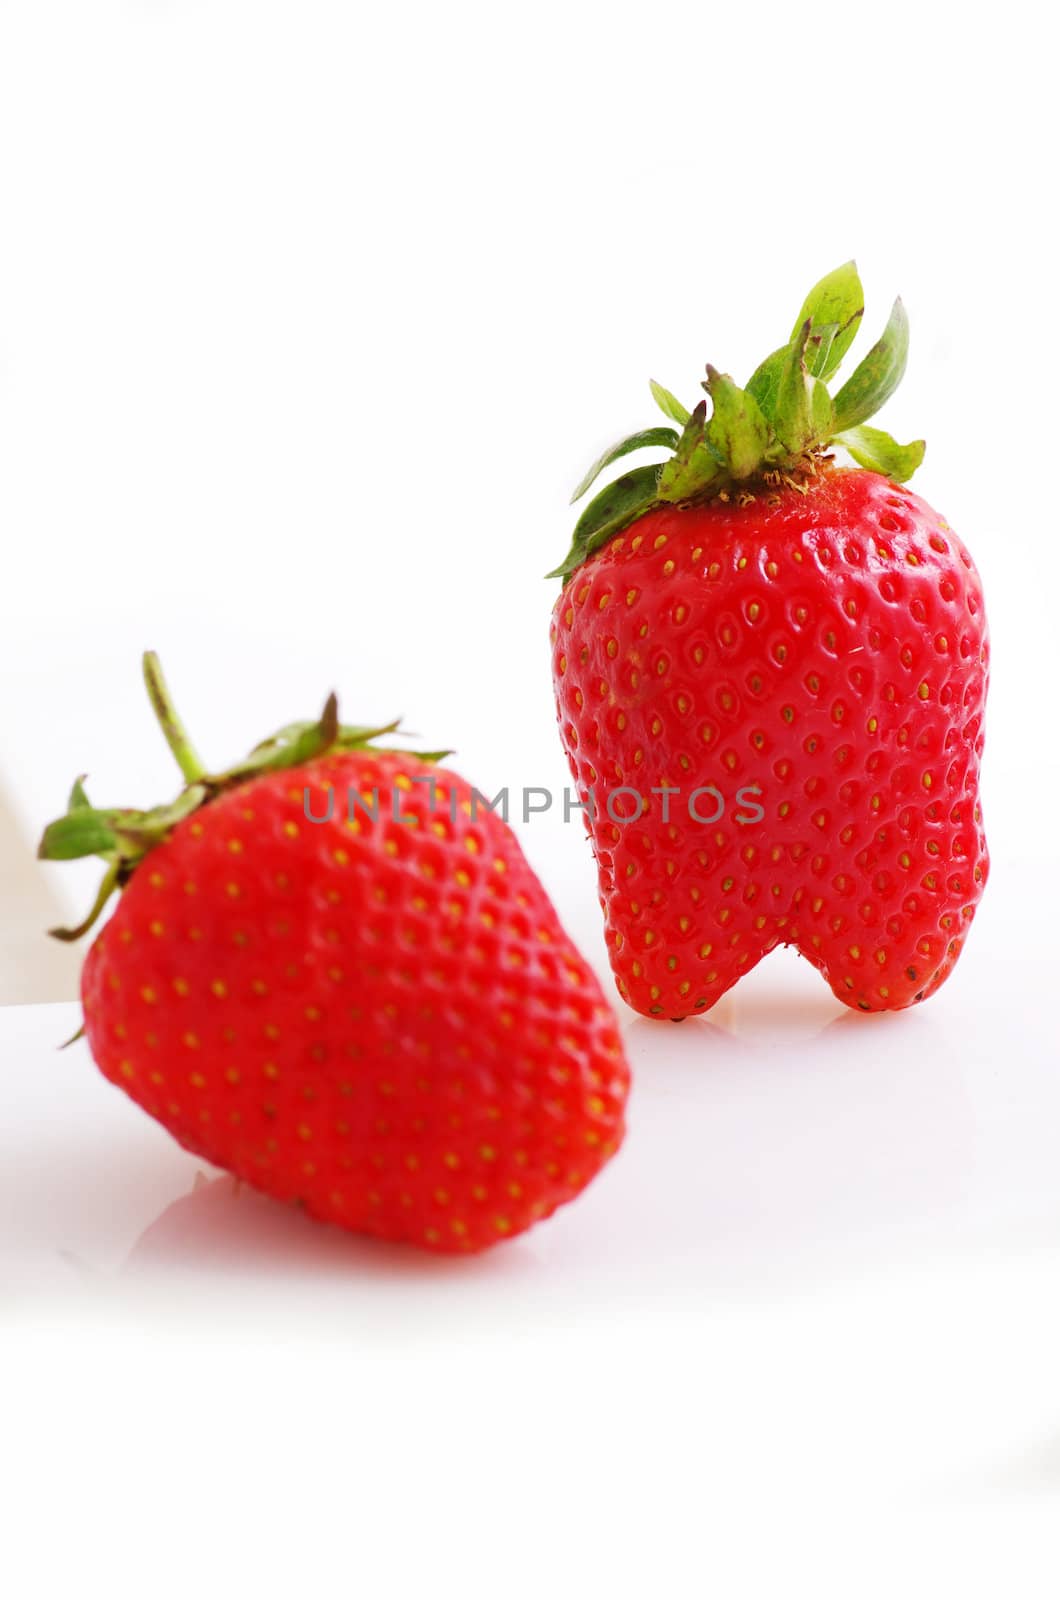 Fresh strawberries were placed on a white background  by dolnikow